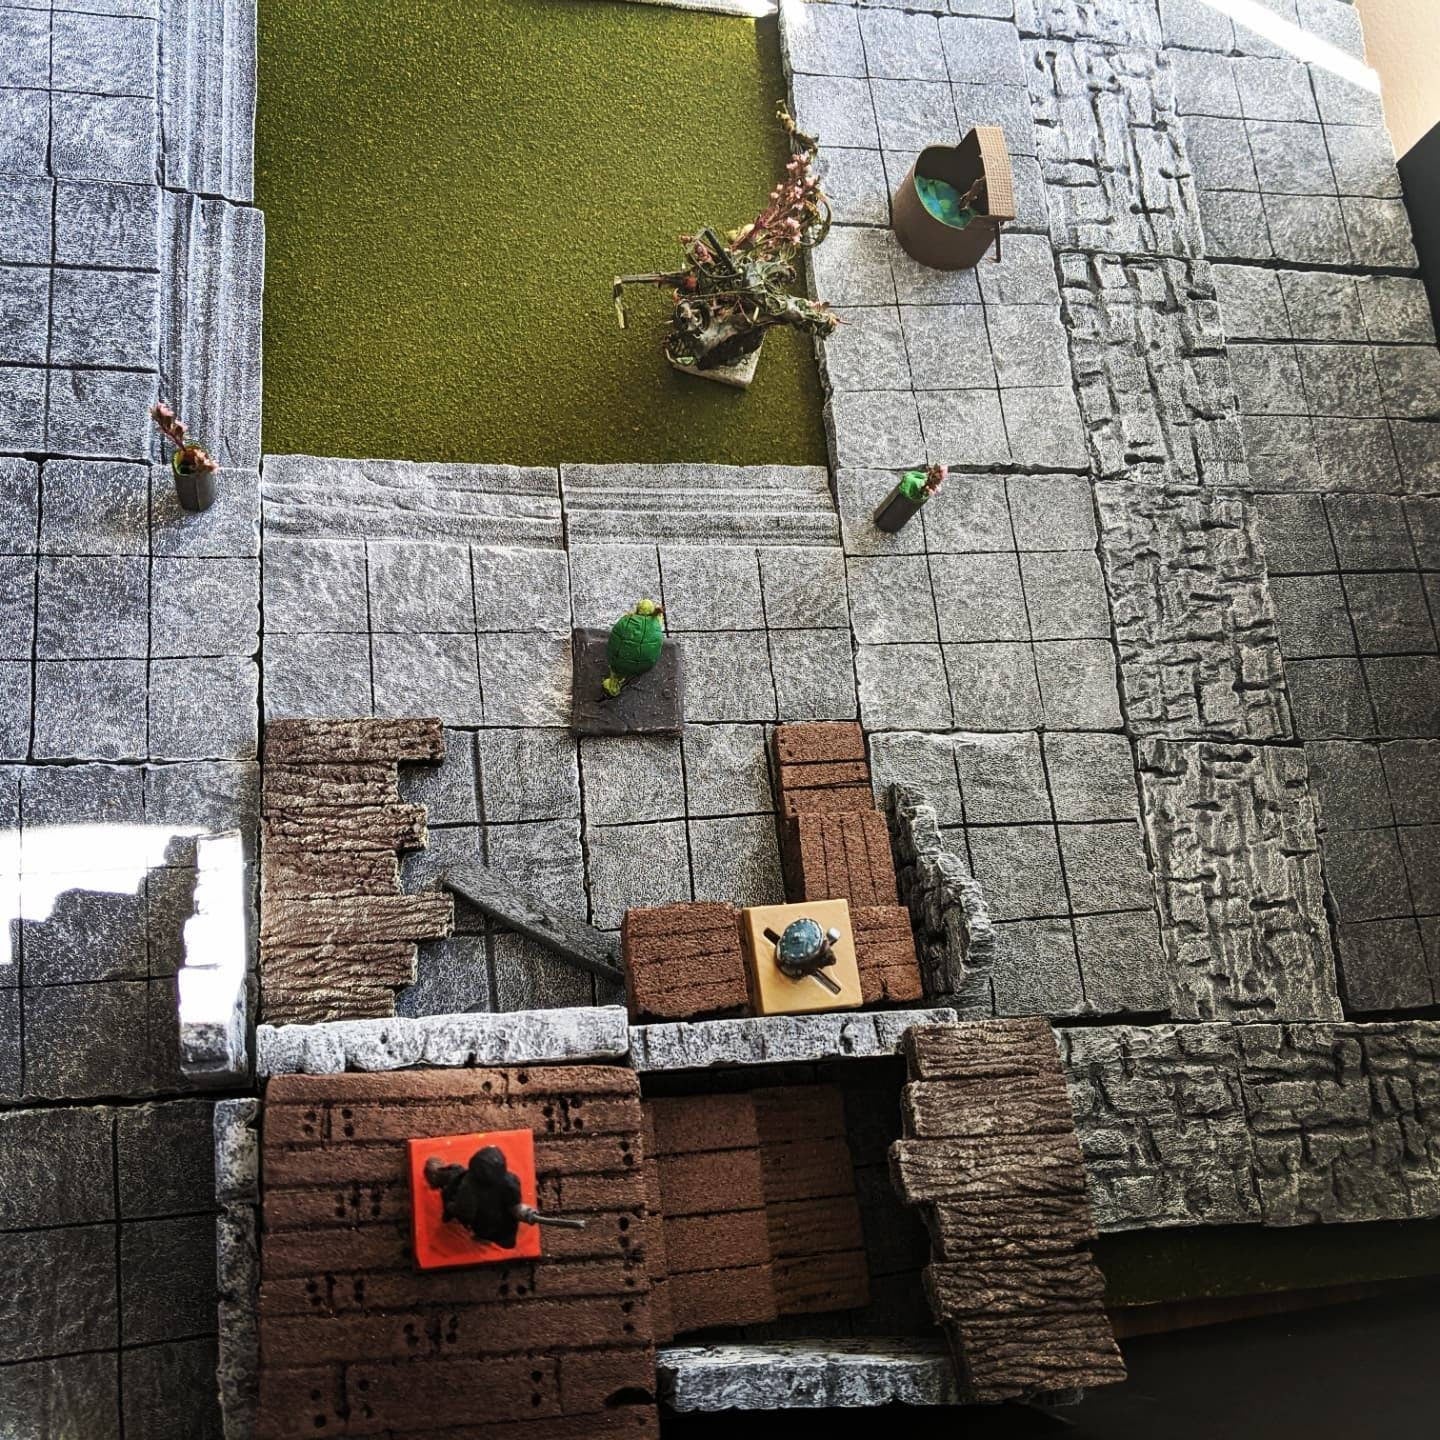 Realistic Modular Grass Tiles available in a range of sizes for Dungeons and Dragons/ Warhammer/ TTRPGs/ Wargaming